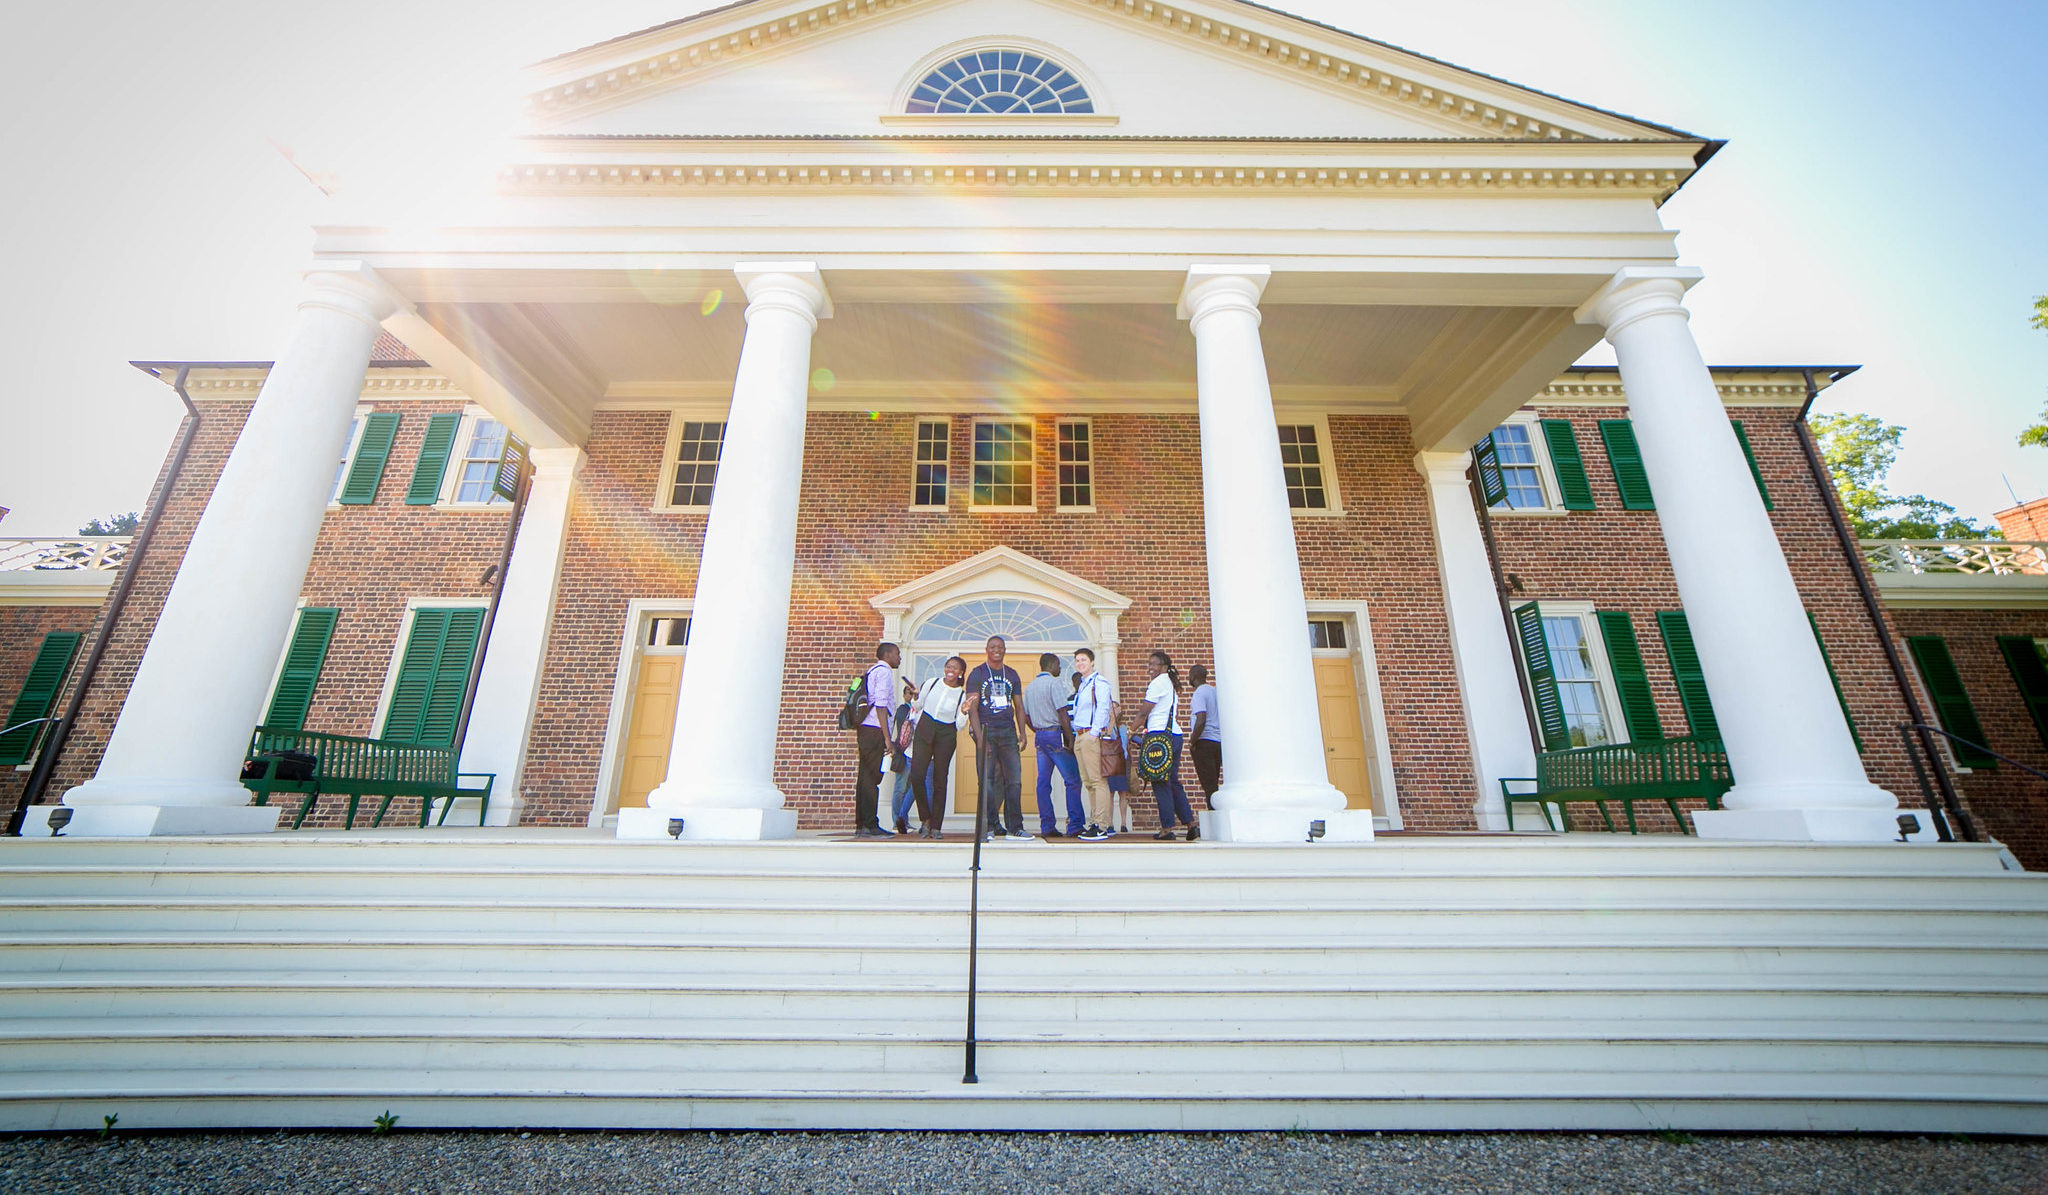 Fellows on the front portico of James Madison's Montpelier